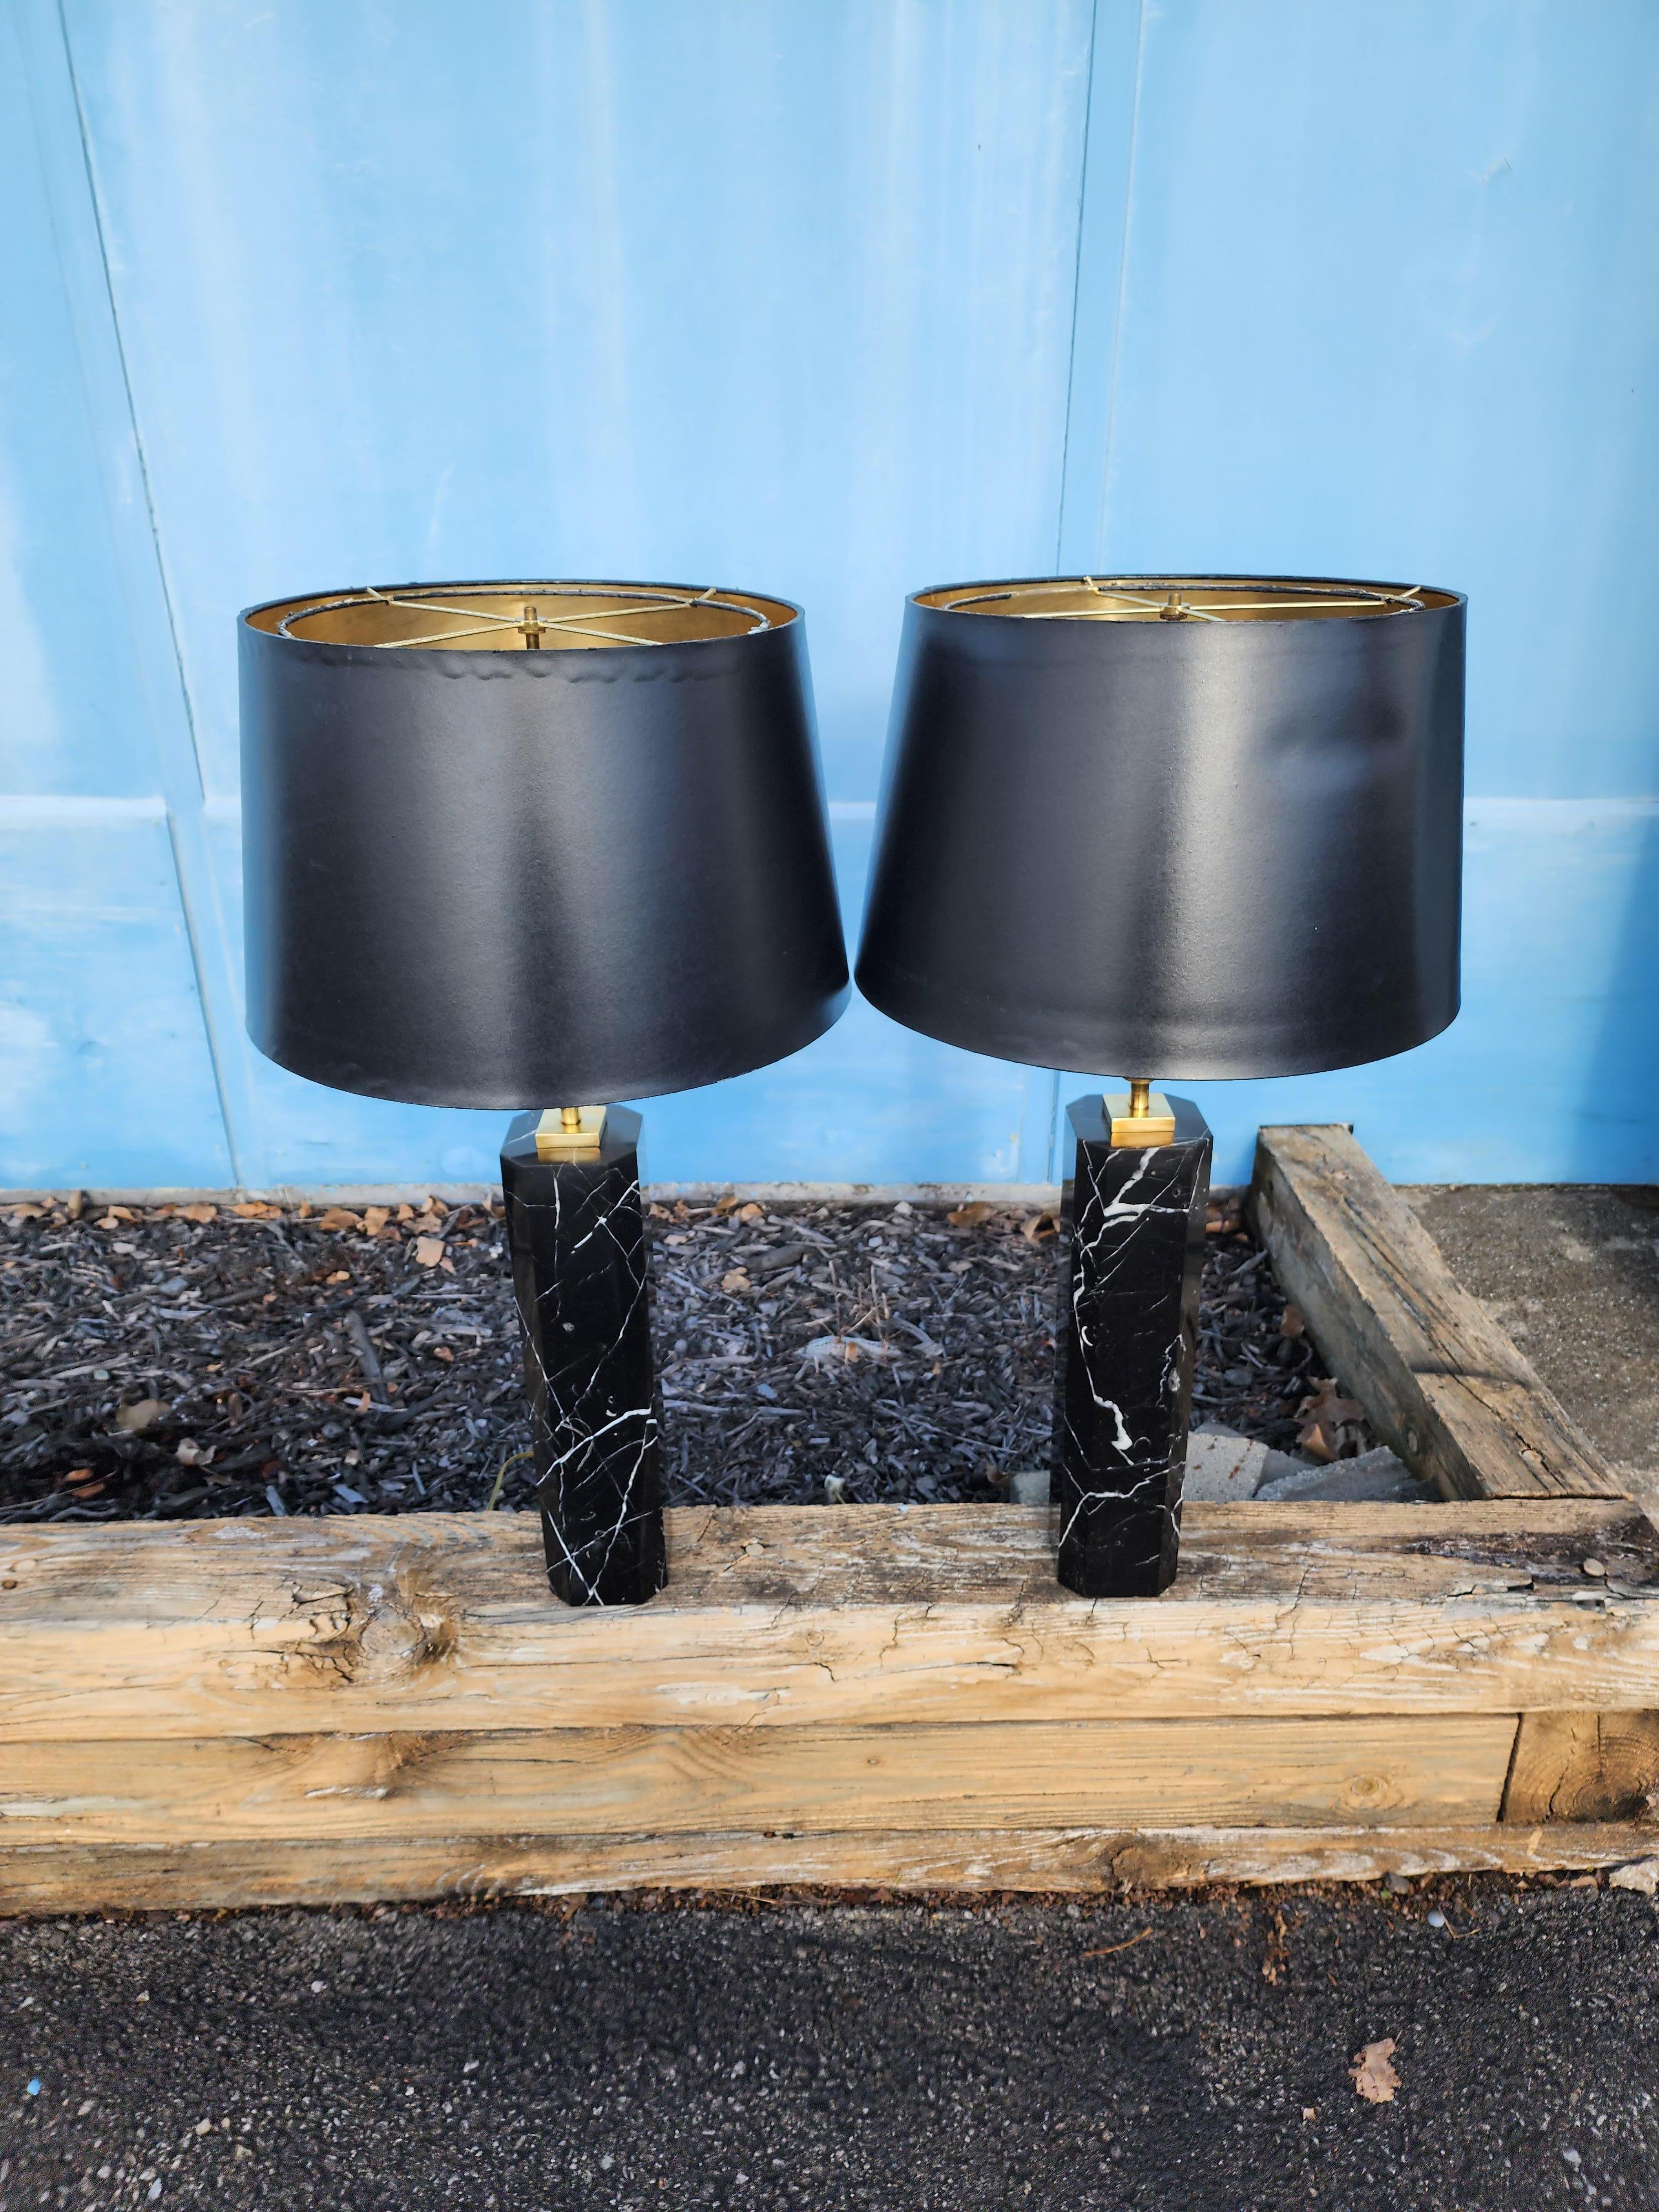 Elegant and rare, not Calacatta marble, pair of octagonal marble lamps, designed by T.H. Robsjohn Gibbings for Hansen, American, circa 1960s. Beautiful black Nero Marqunia marble, original brass hardware and desirable three way rotary switch.
These